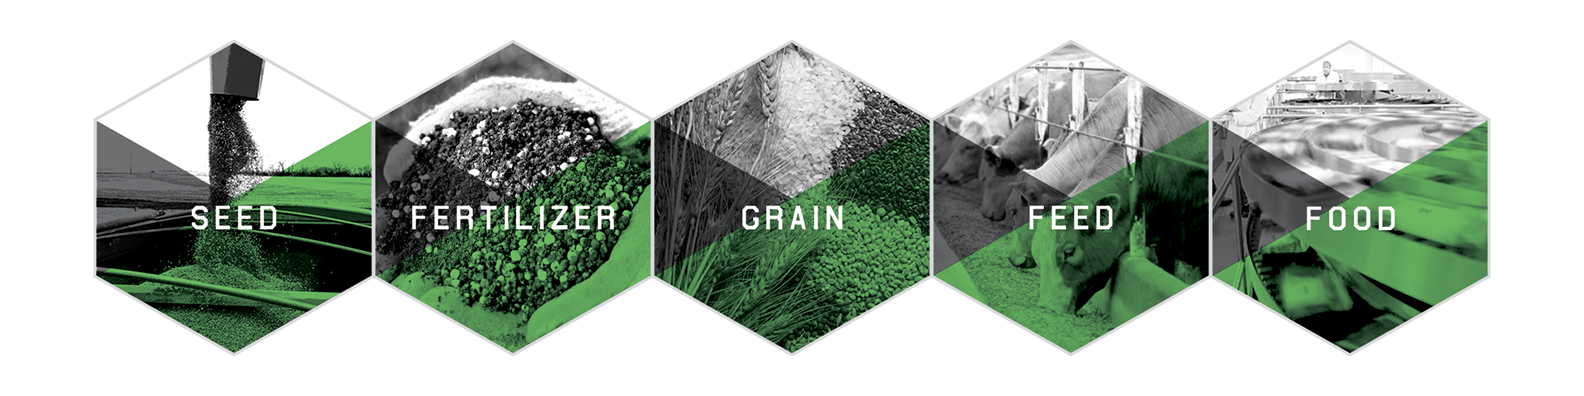 AGI operates across five platforms: Seed, Fertilizer, Grain, Feed, and Food